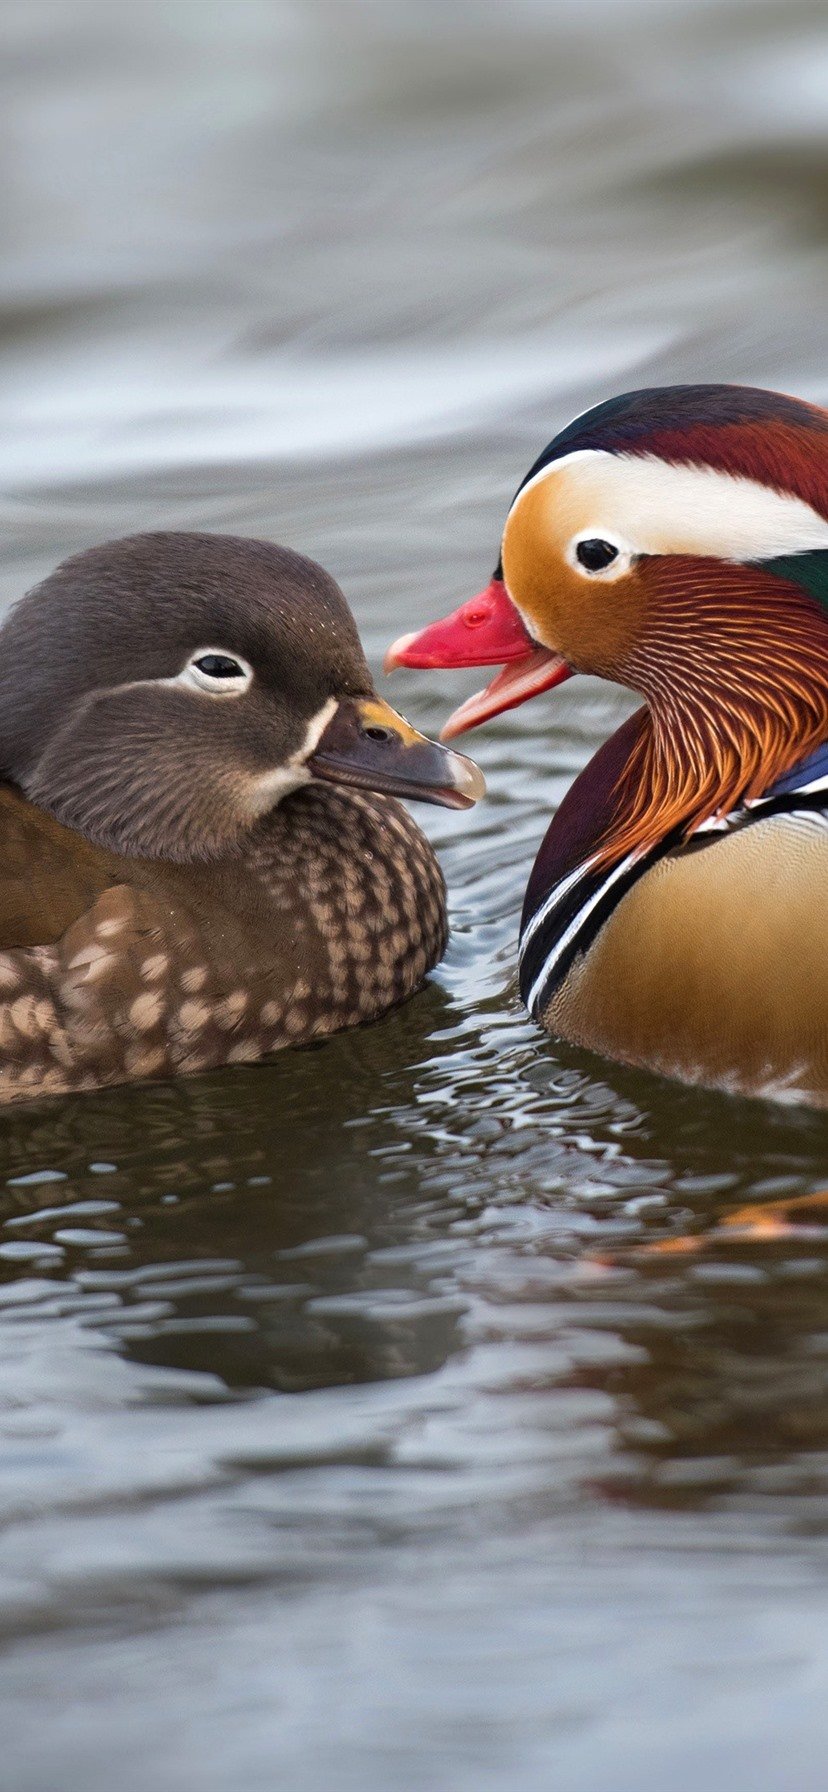 Two birds mandarin duck water 1080x1920 iPhone 8766S Plus wallpaper  background picture image